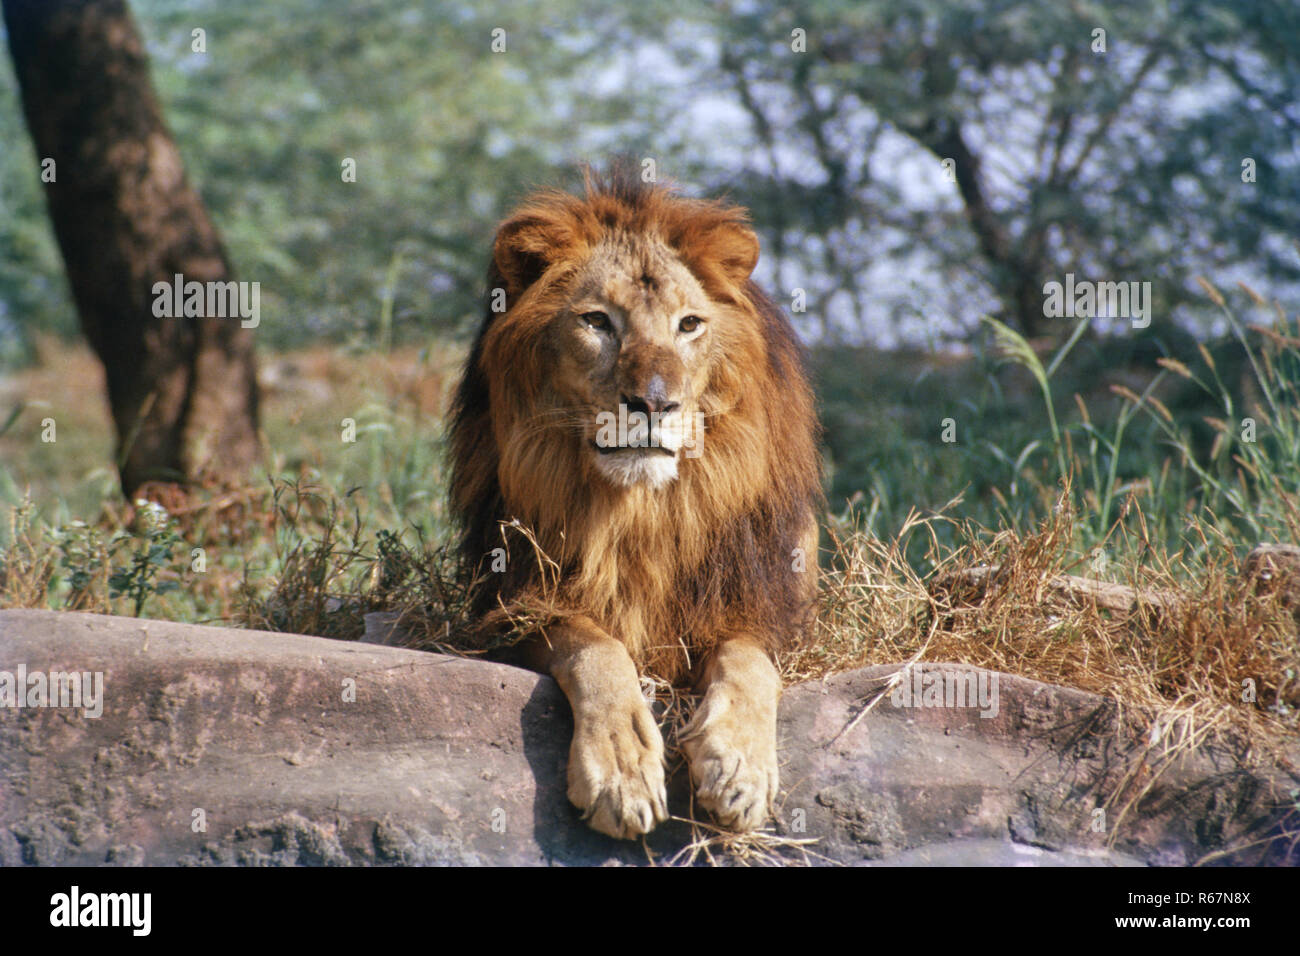 Lion sitting in Forest Stock Photo